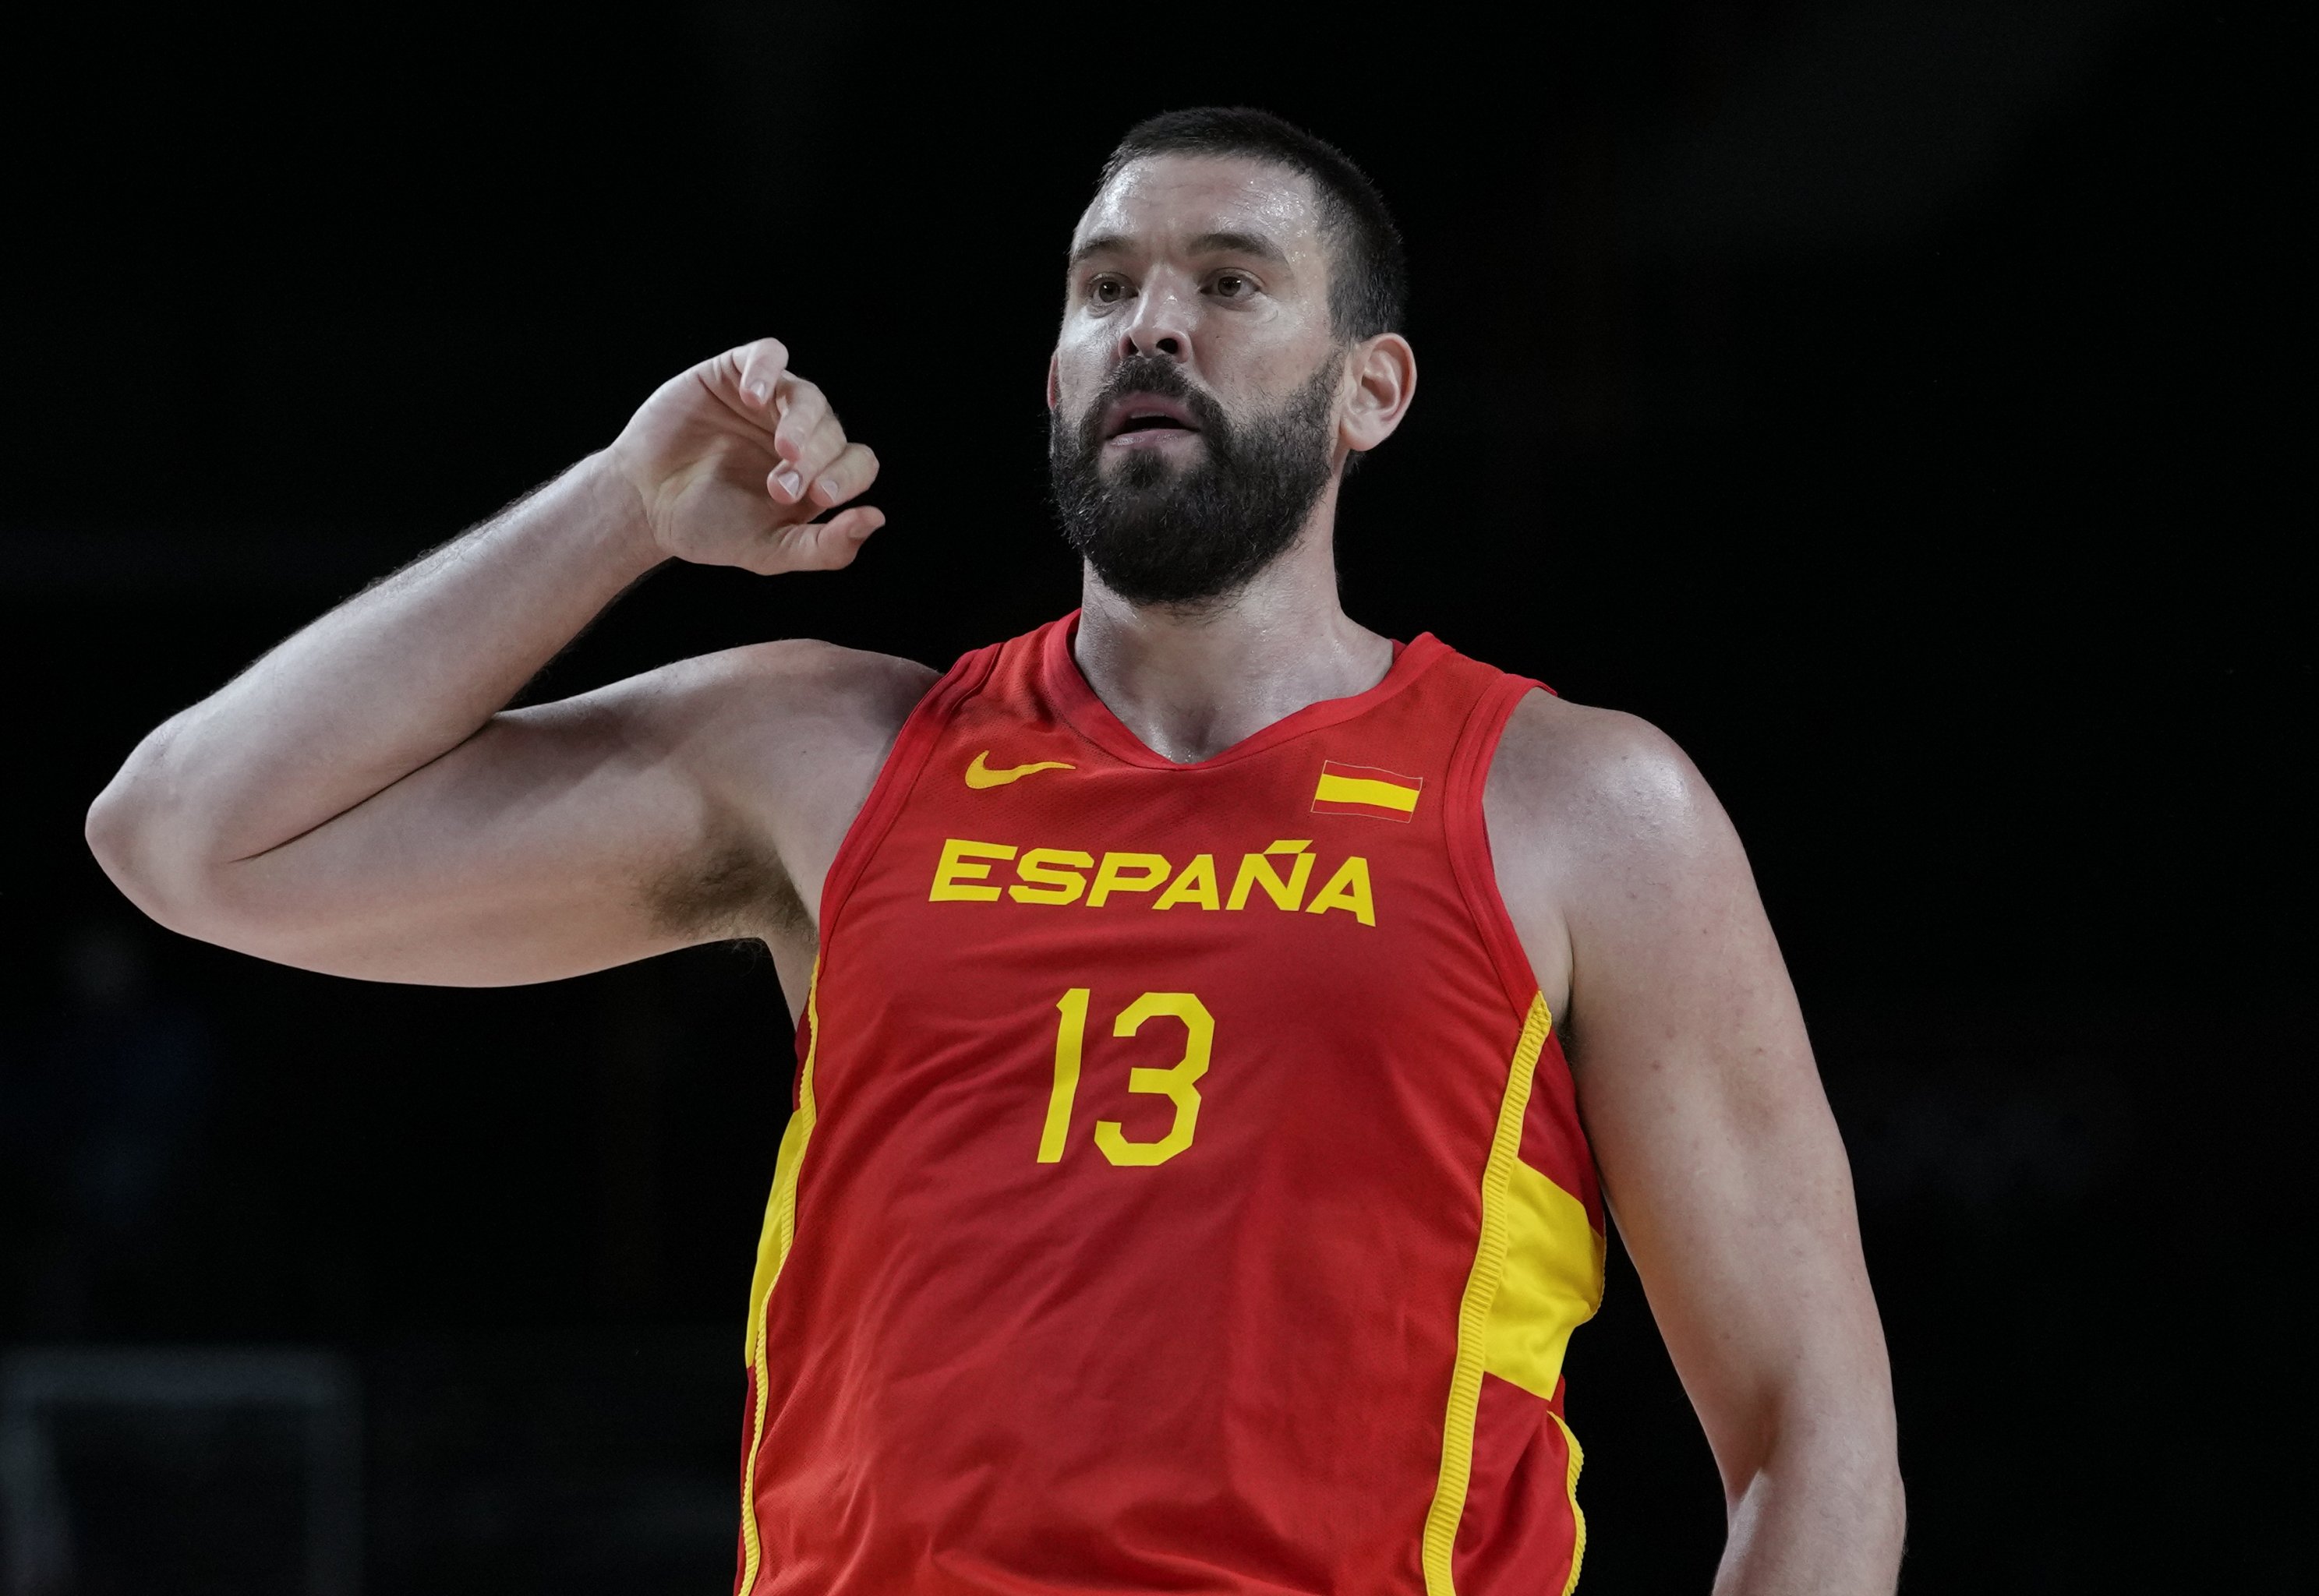 Marc Gasol confirms he will return to Lakers for 2021-22 season